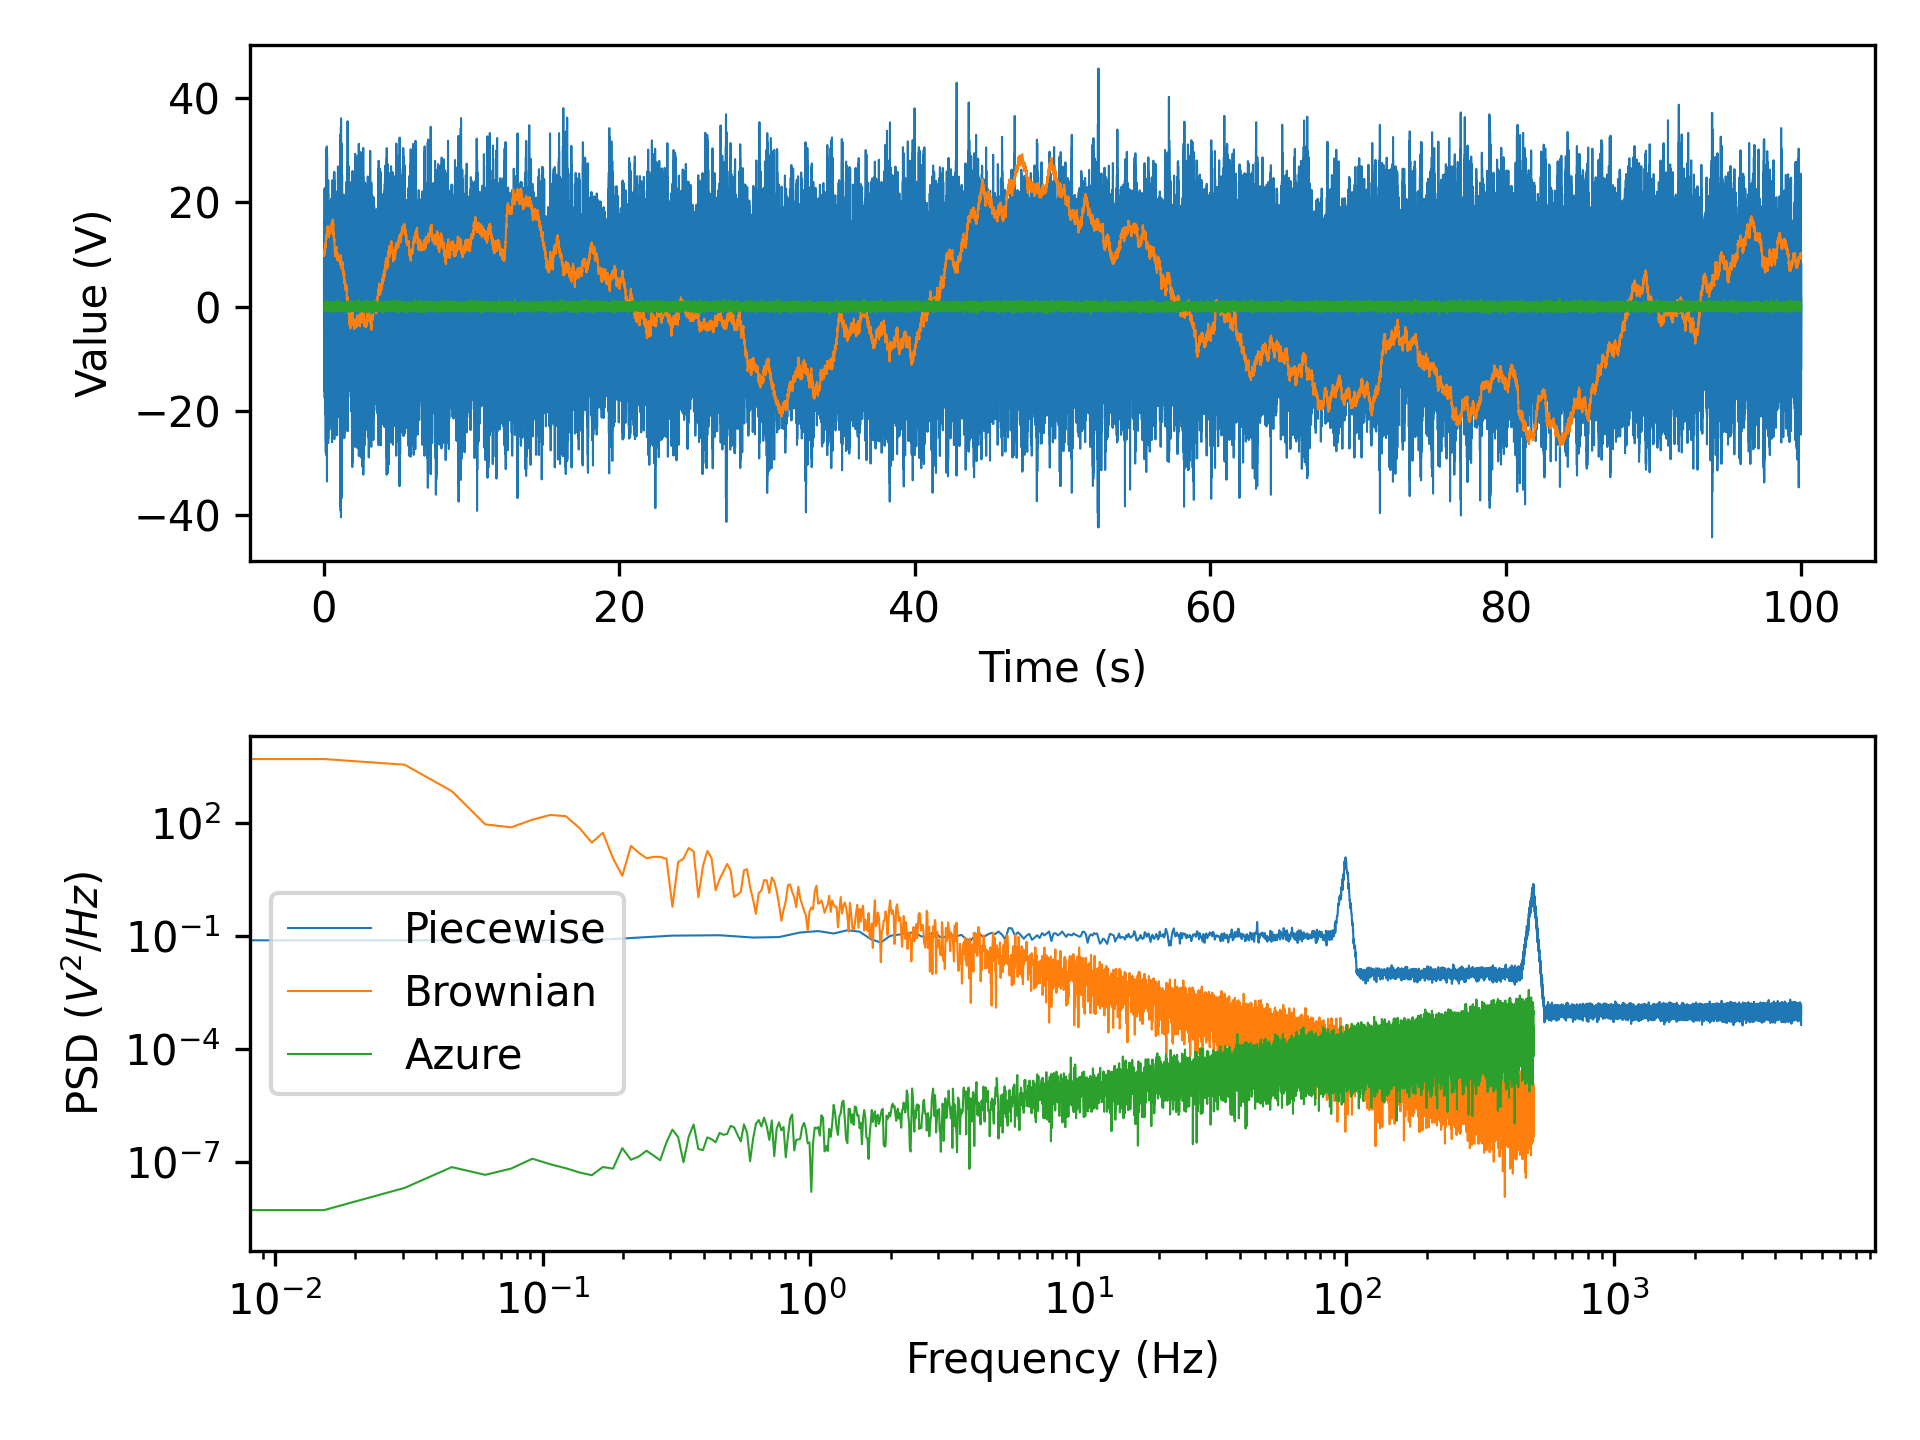 A dual plot showing 3 noise signals in the time domain and their power spectral density. A piecewise noise with two distinct spikes in the PSD, brownian noise with its distinct 20 dB / decade falloff and azure noise increasing in PSD from a very low value.